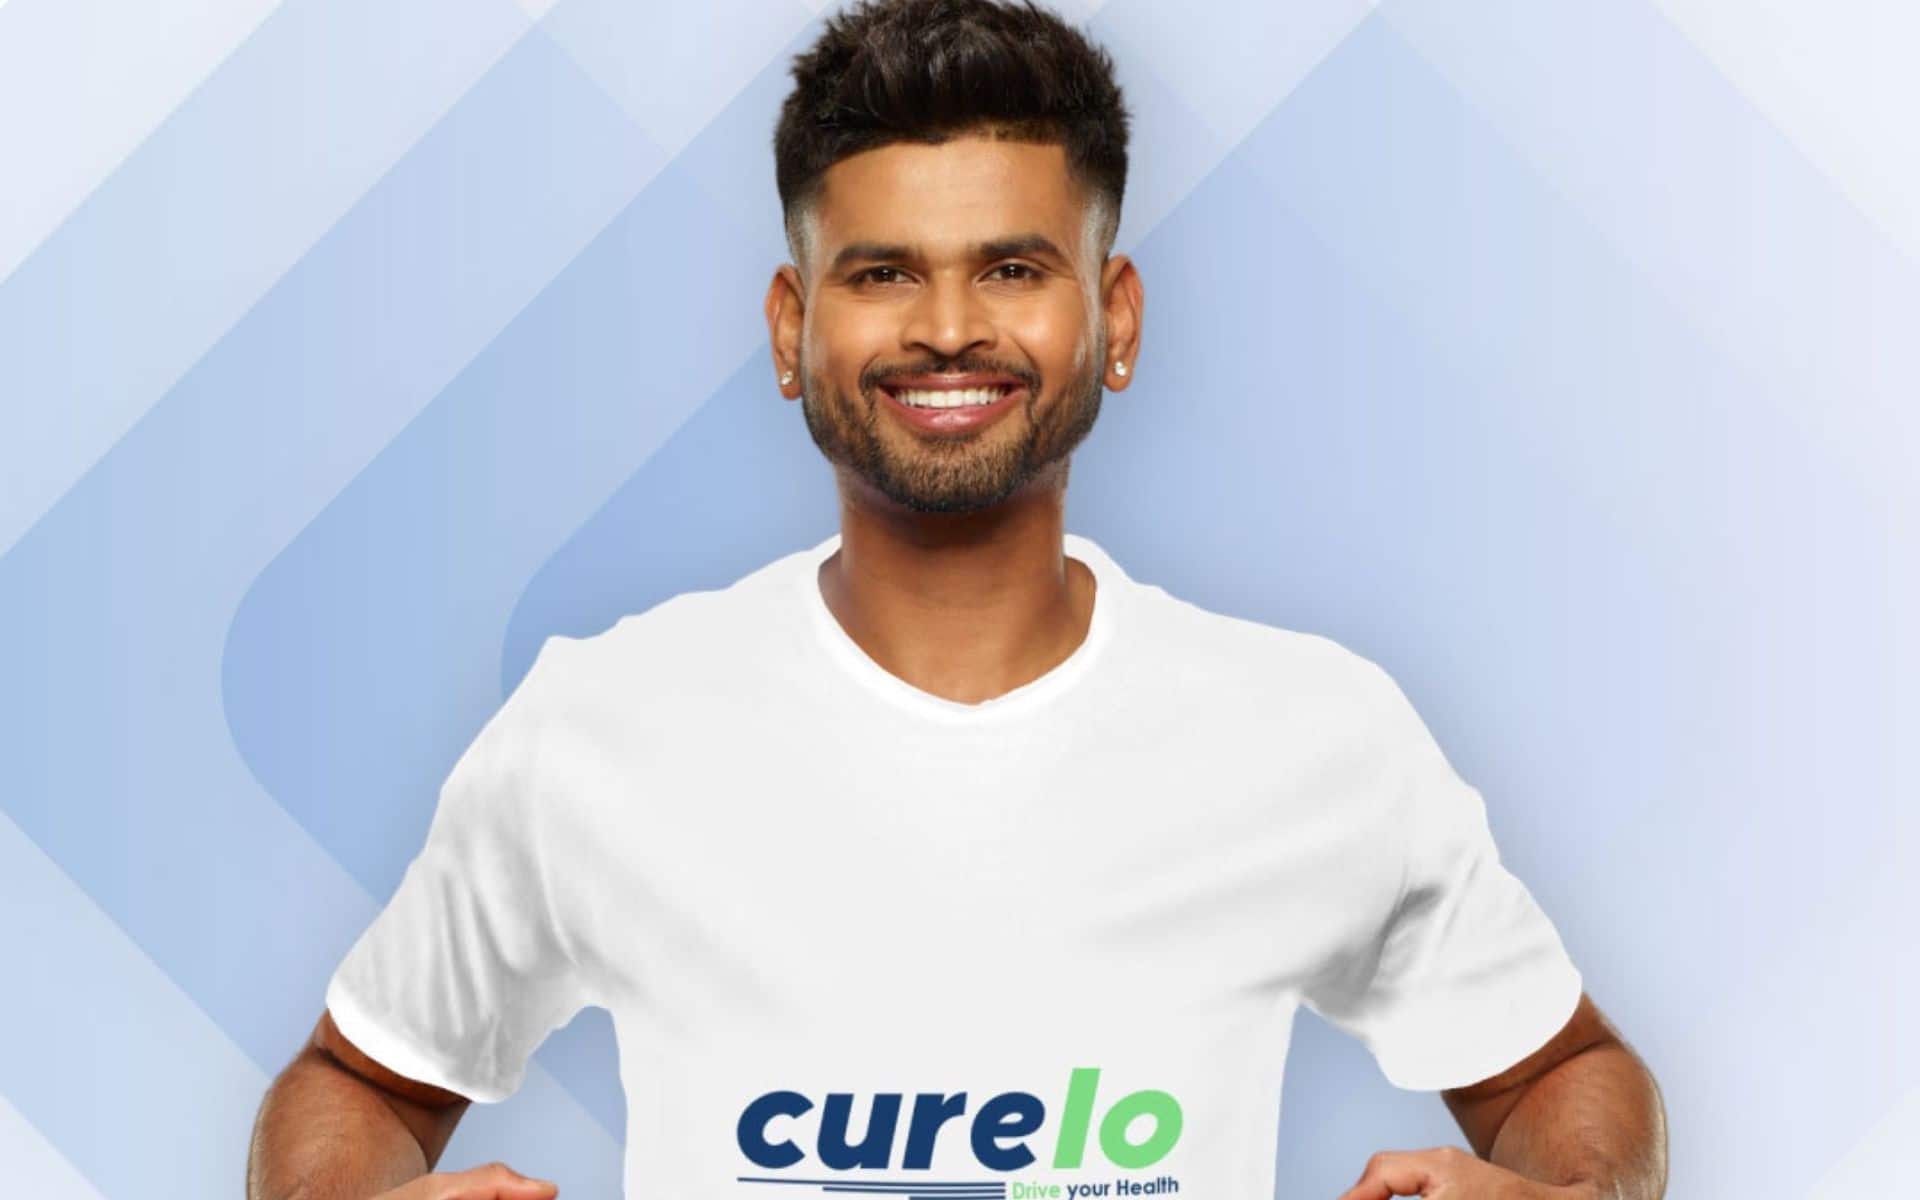 Cricketer Shreyas Iyer recently invested in a wellness company - Curelo [X.com]